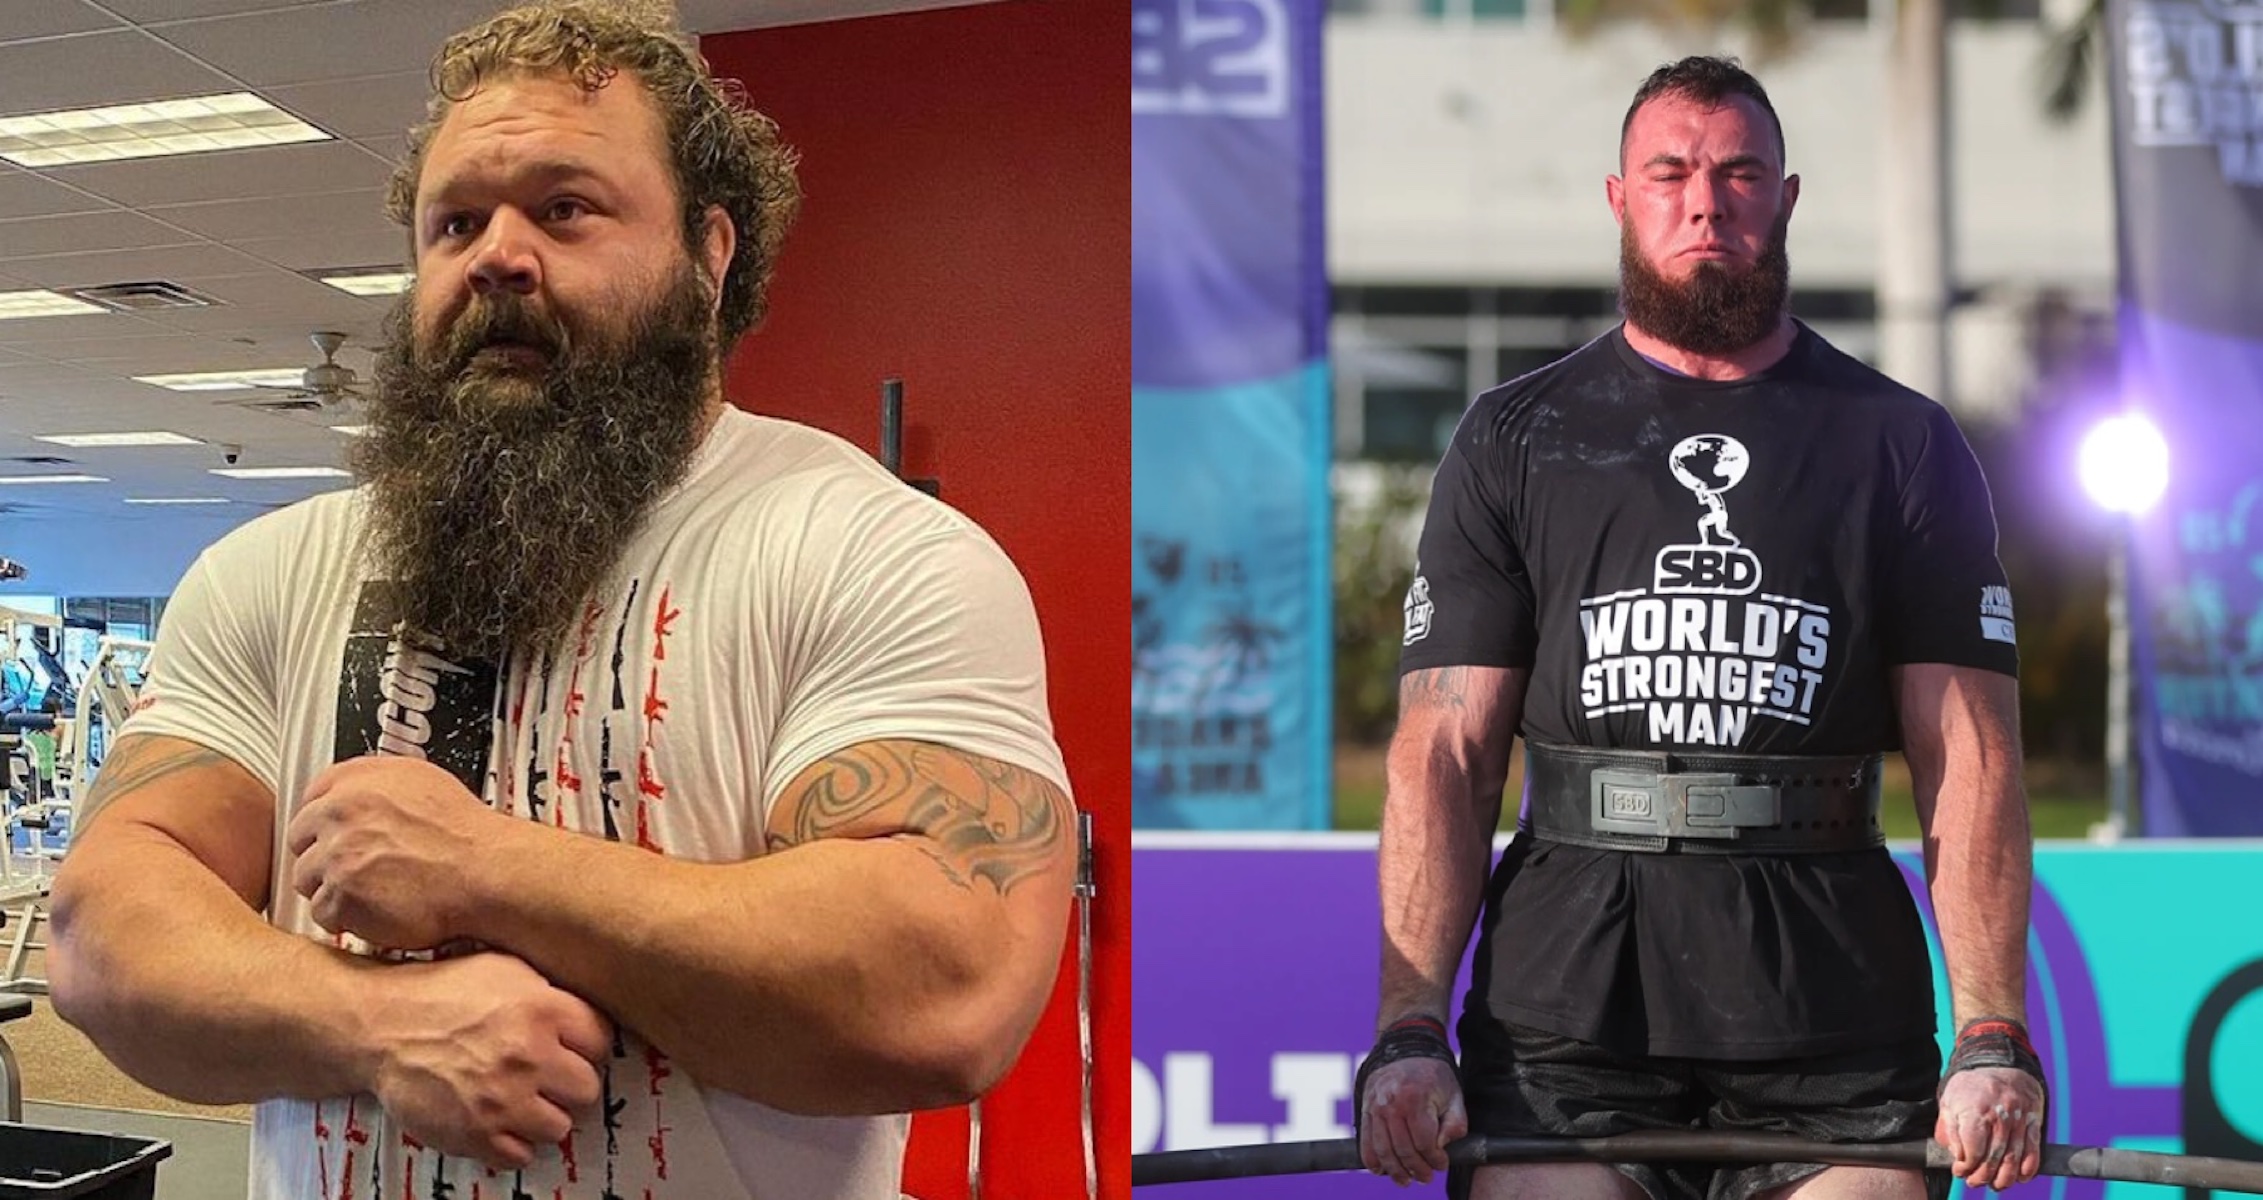 Robert Oberst and Oleksii Novikov Withdraw From 2021 Shaw Classic Due To Injuries